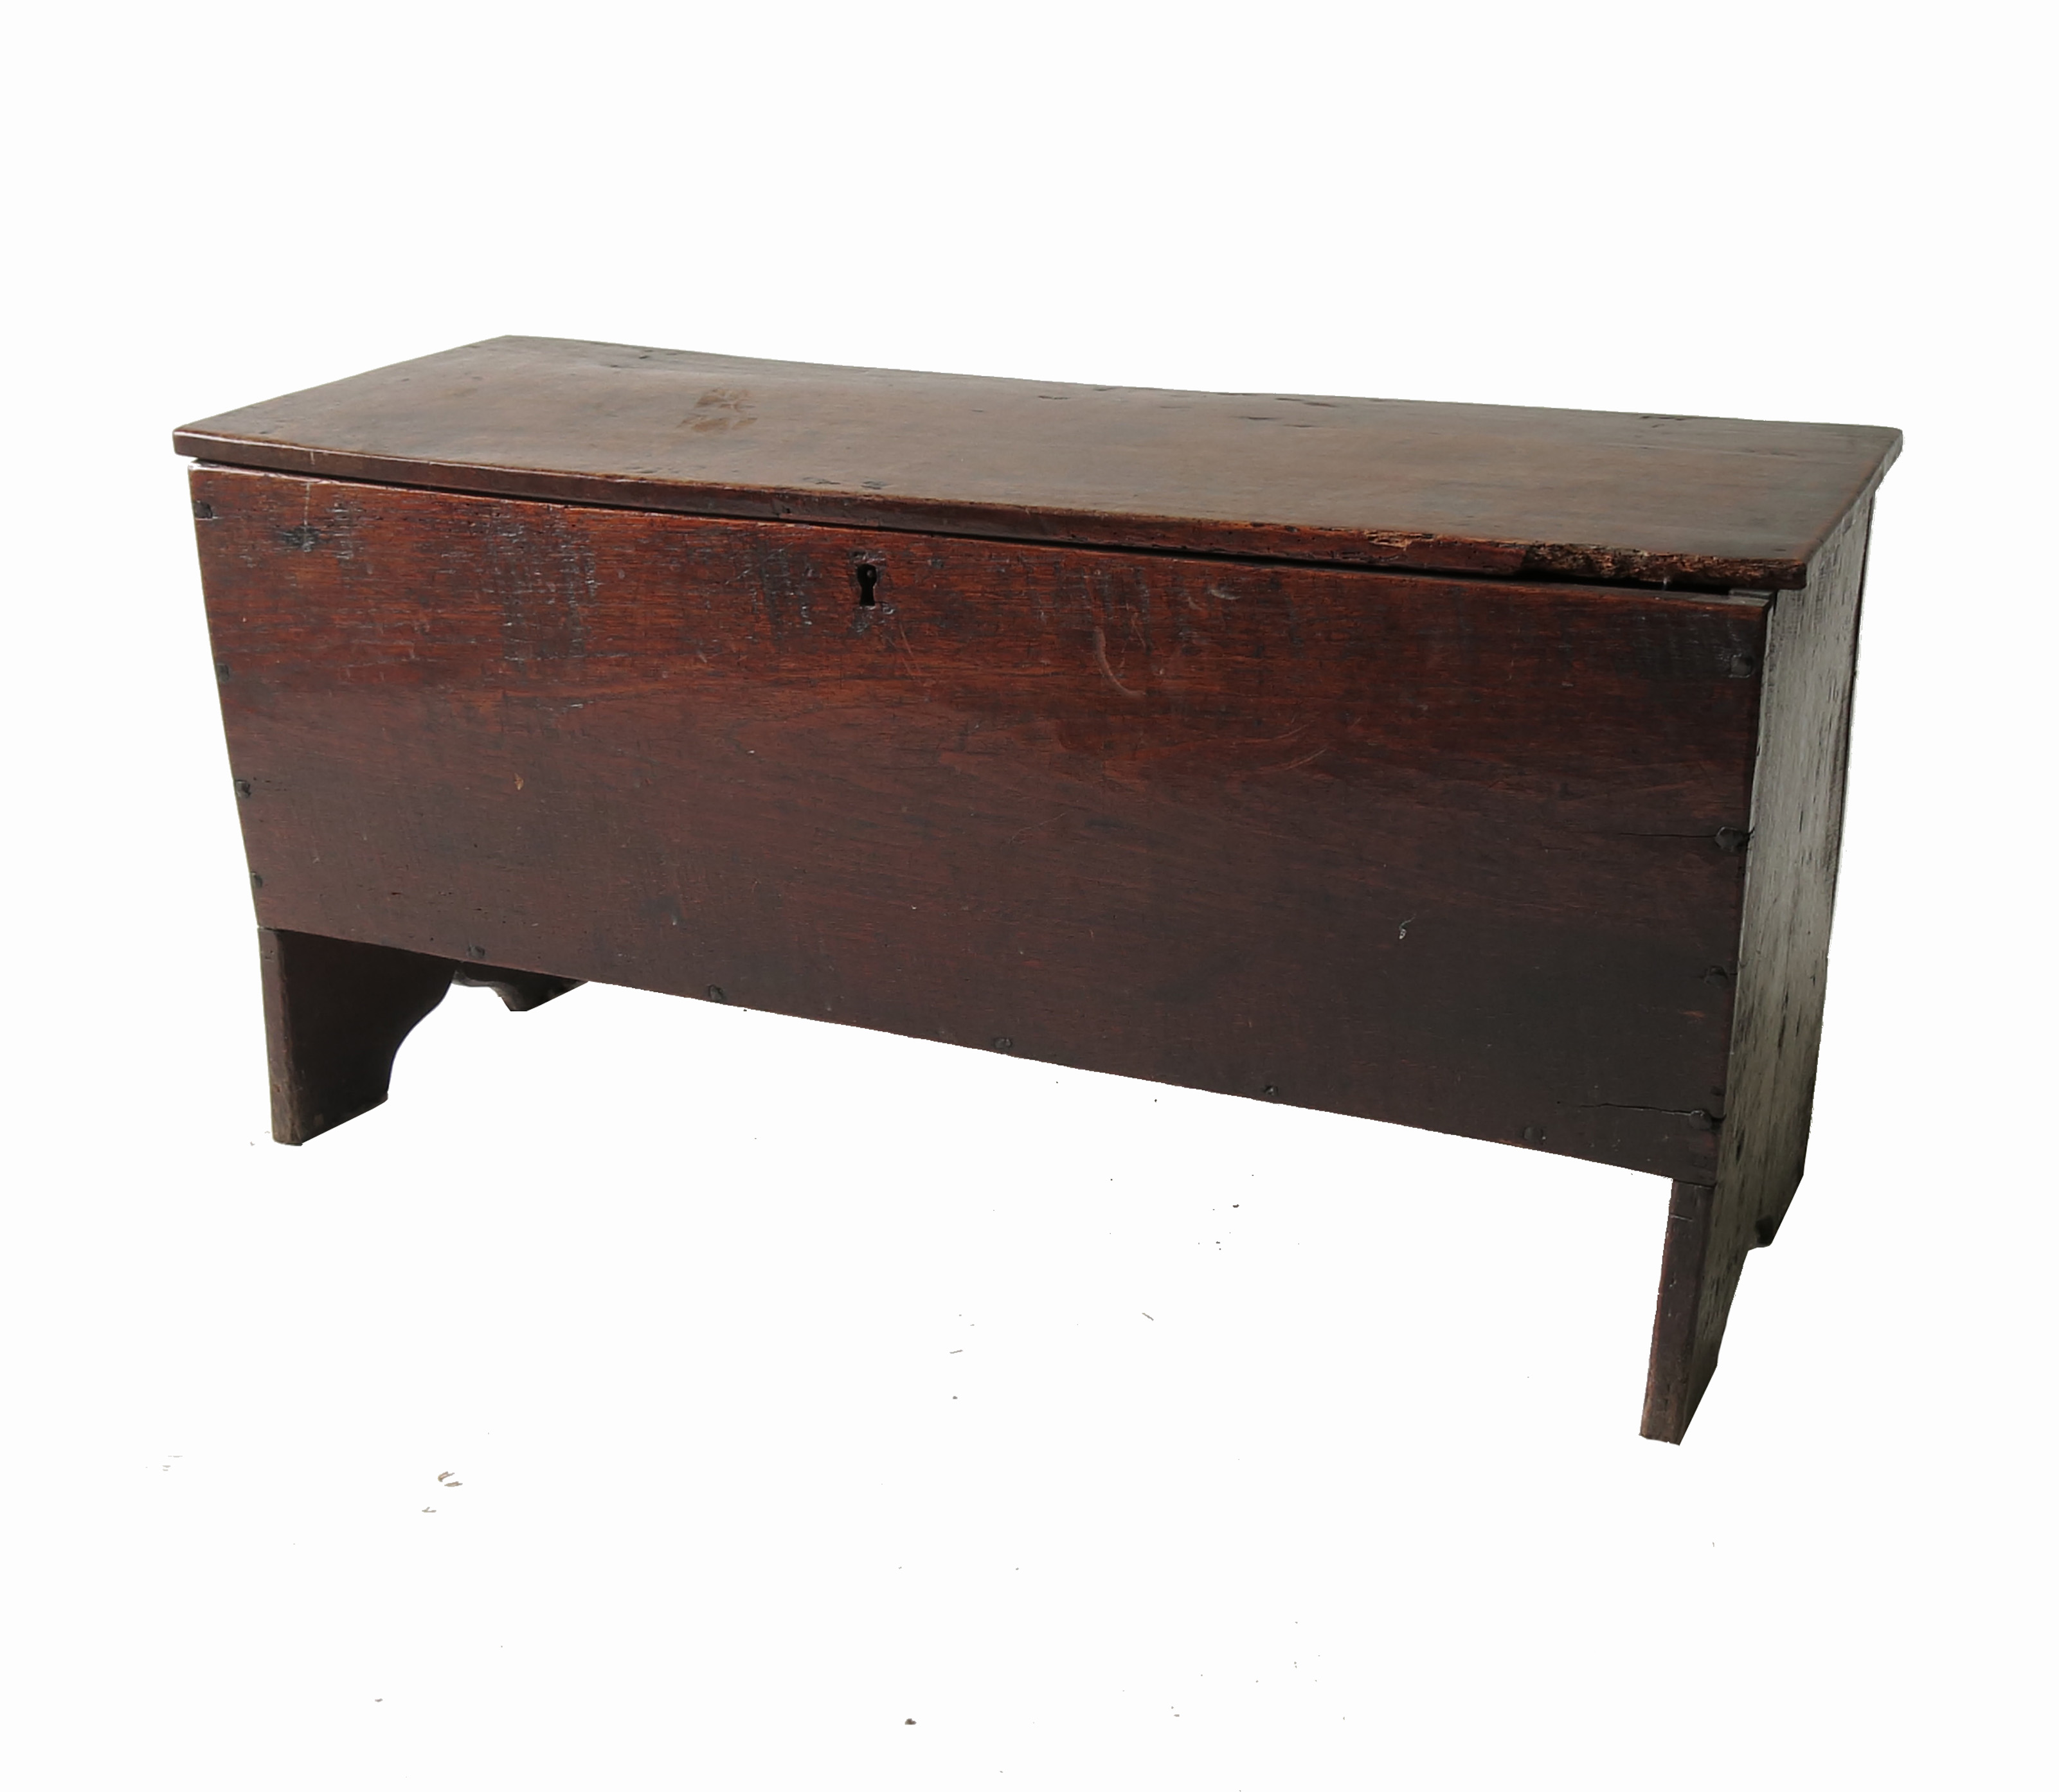 An Antique oak six plank coffer, with plain rising lid, width 35ins, height 17.